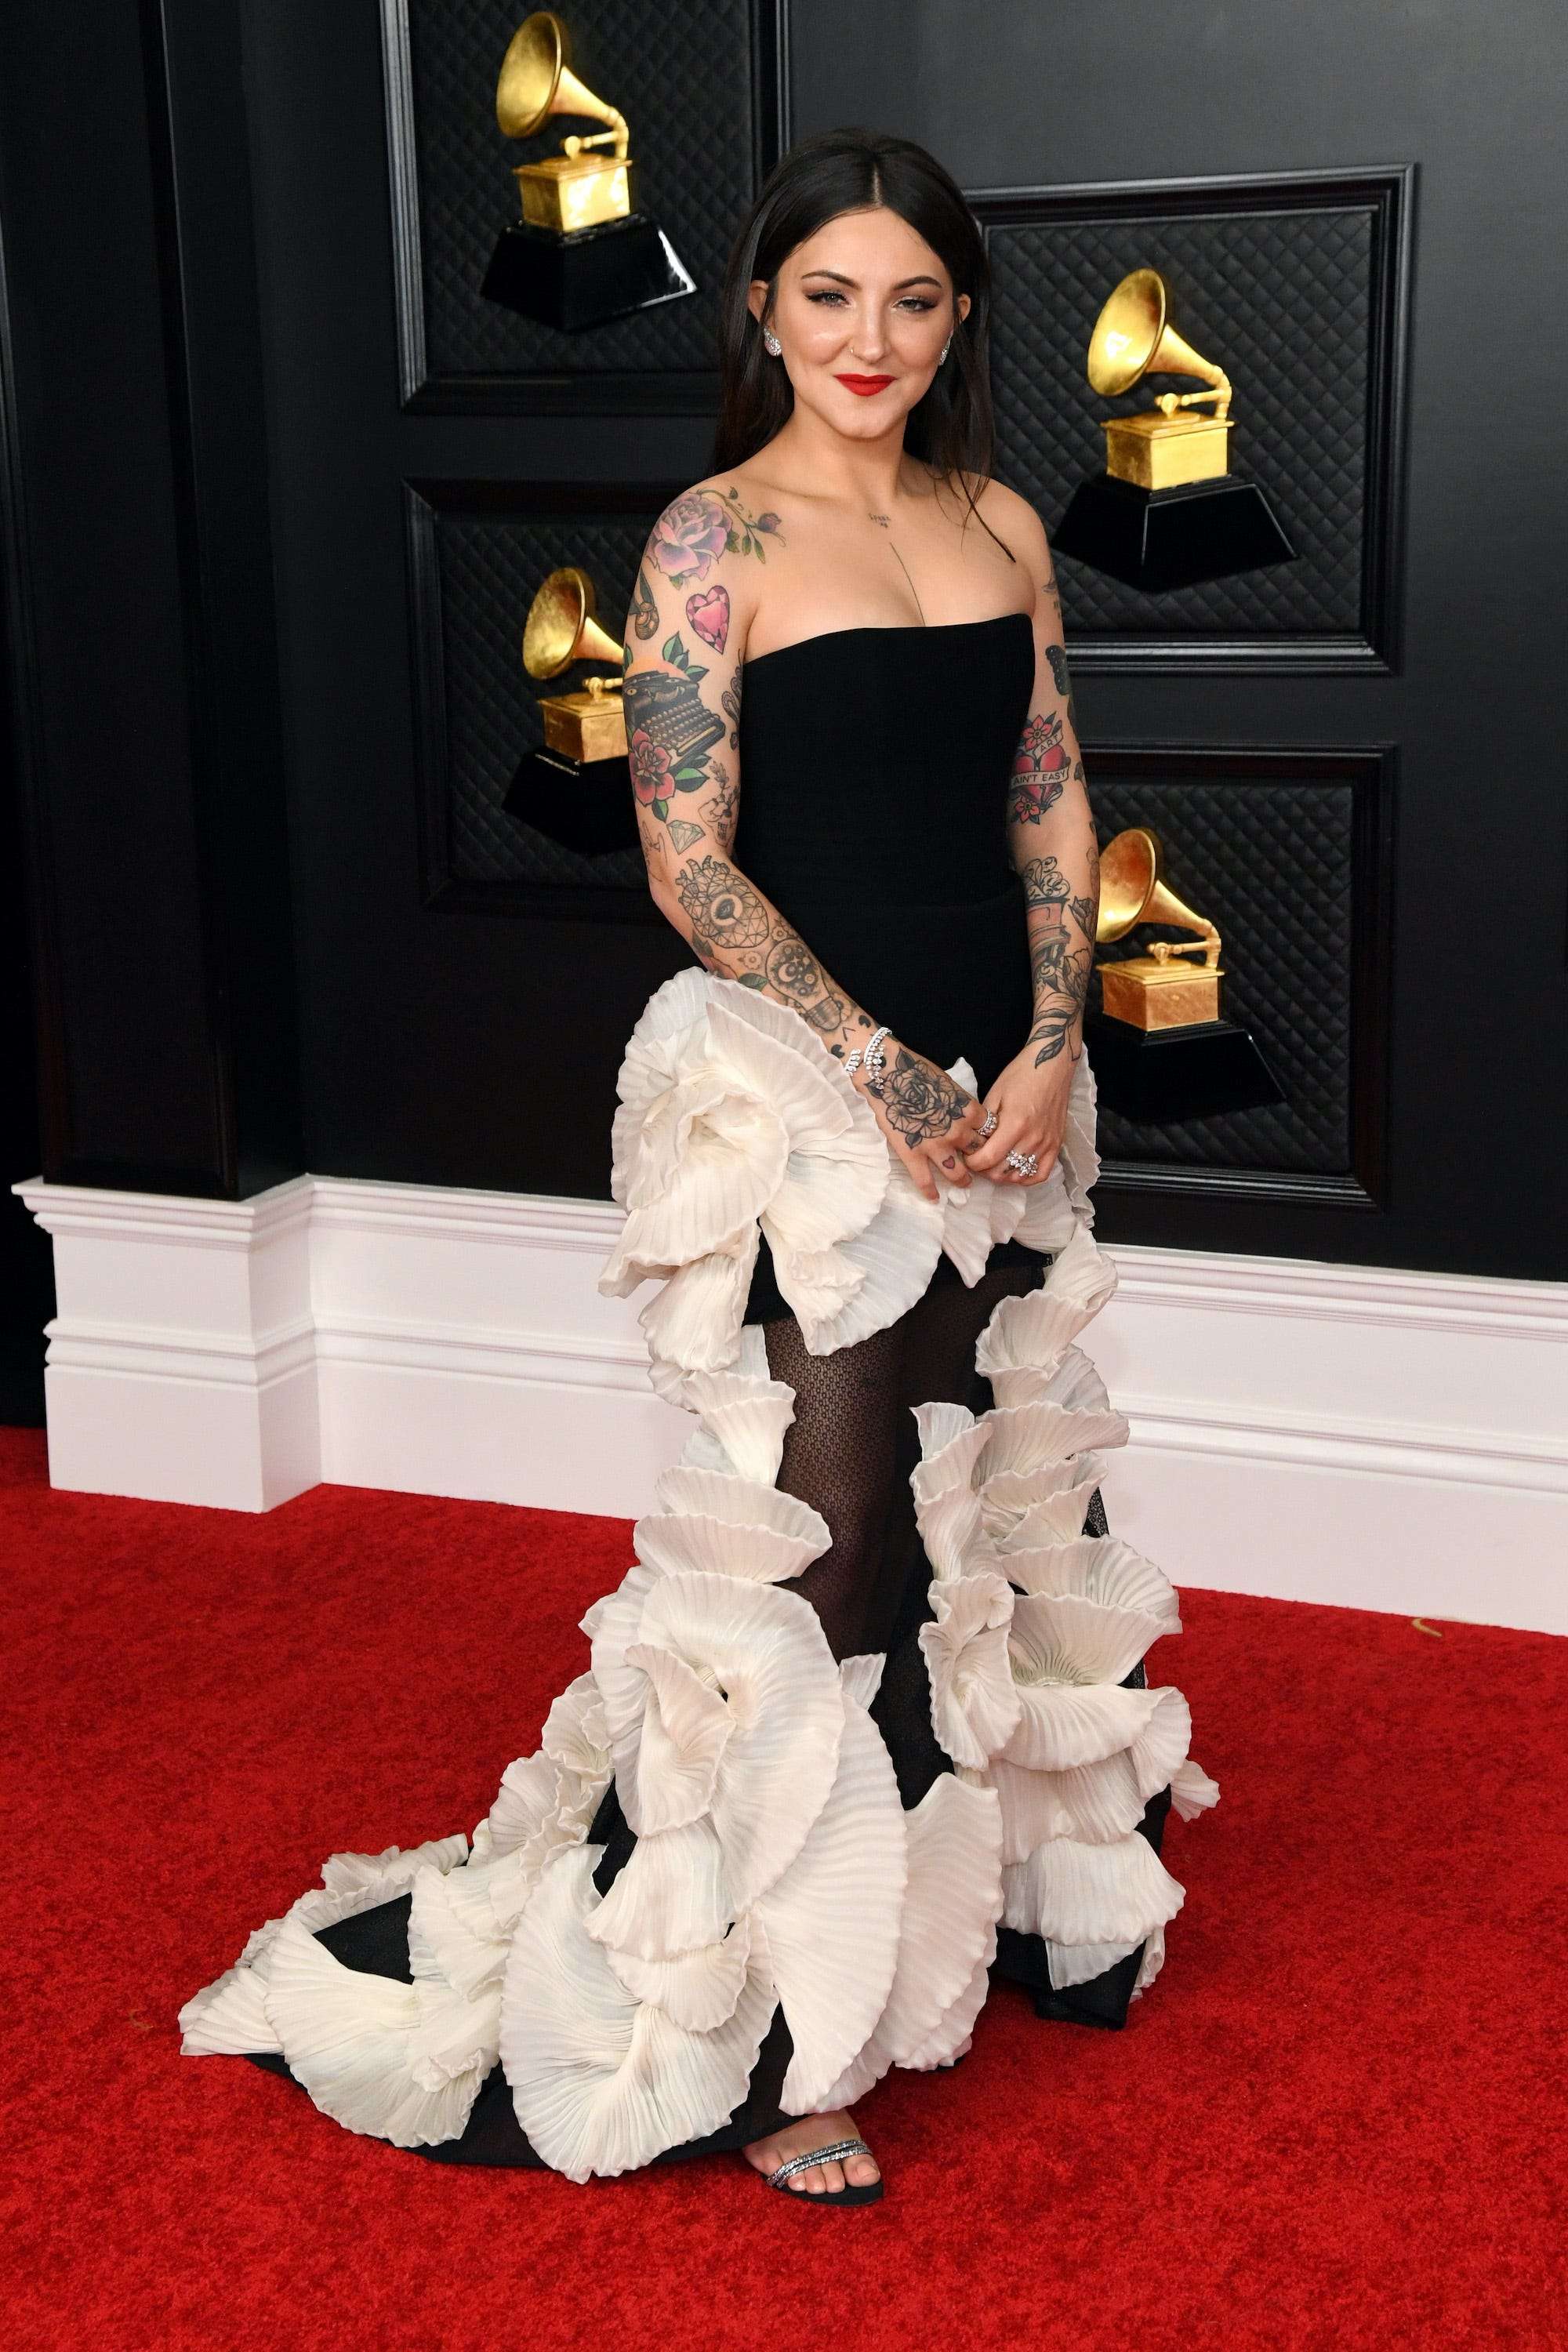 13 of the wildest outfits celebrities wore at the 2021 Grammys